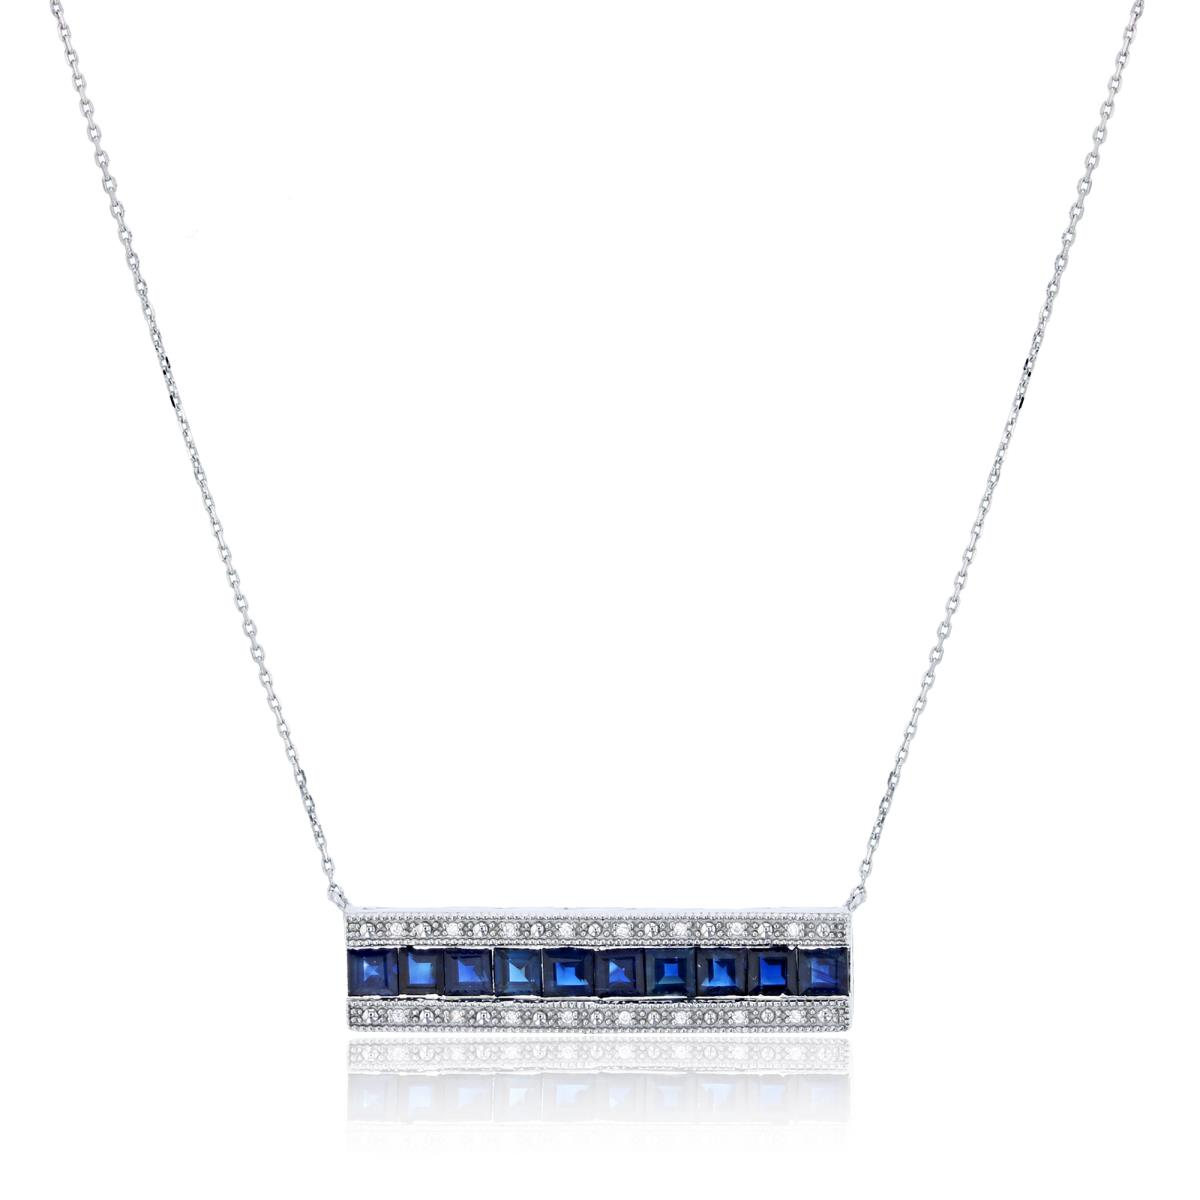 Sterling Silver Rhodium CZ Rnd & 3mm Square Sapphire Bar 17" Necklace